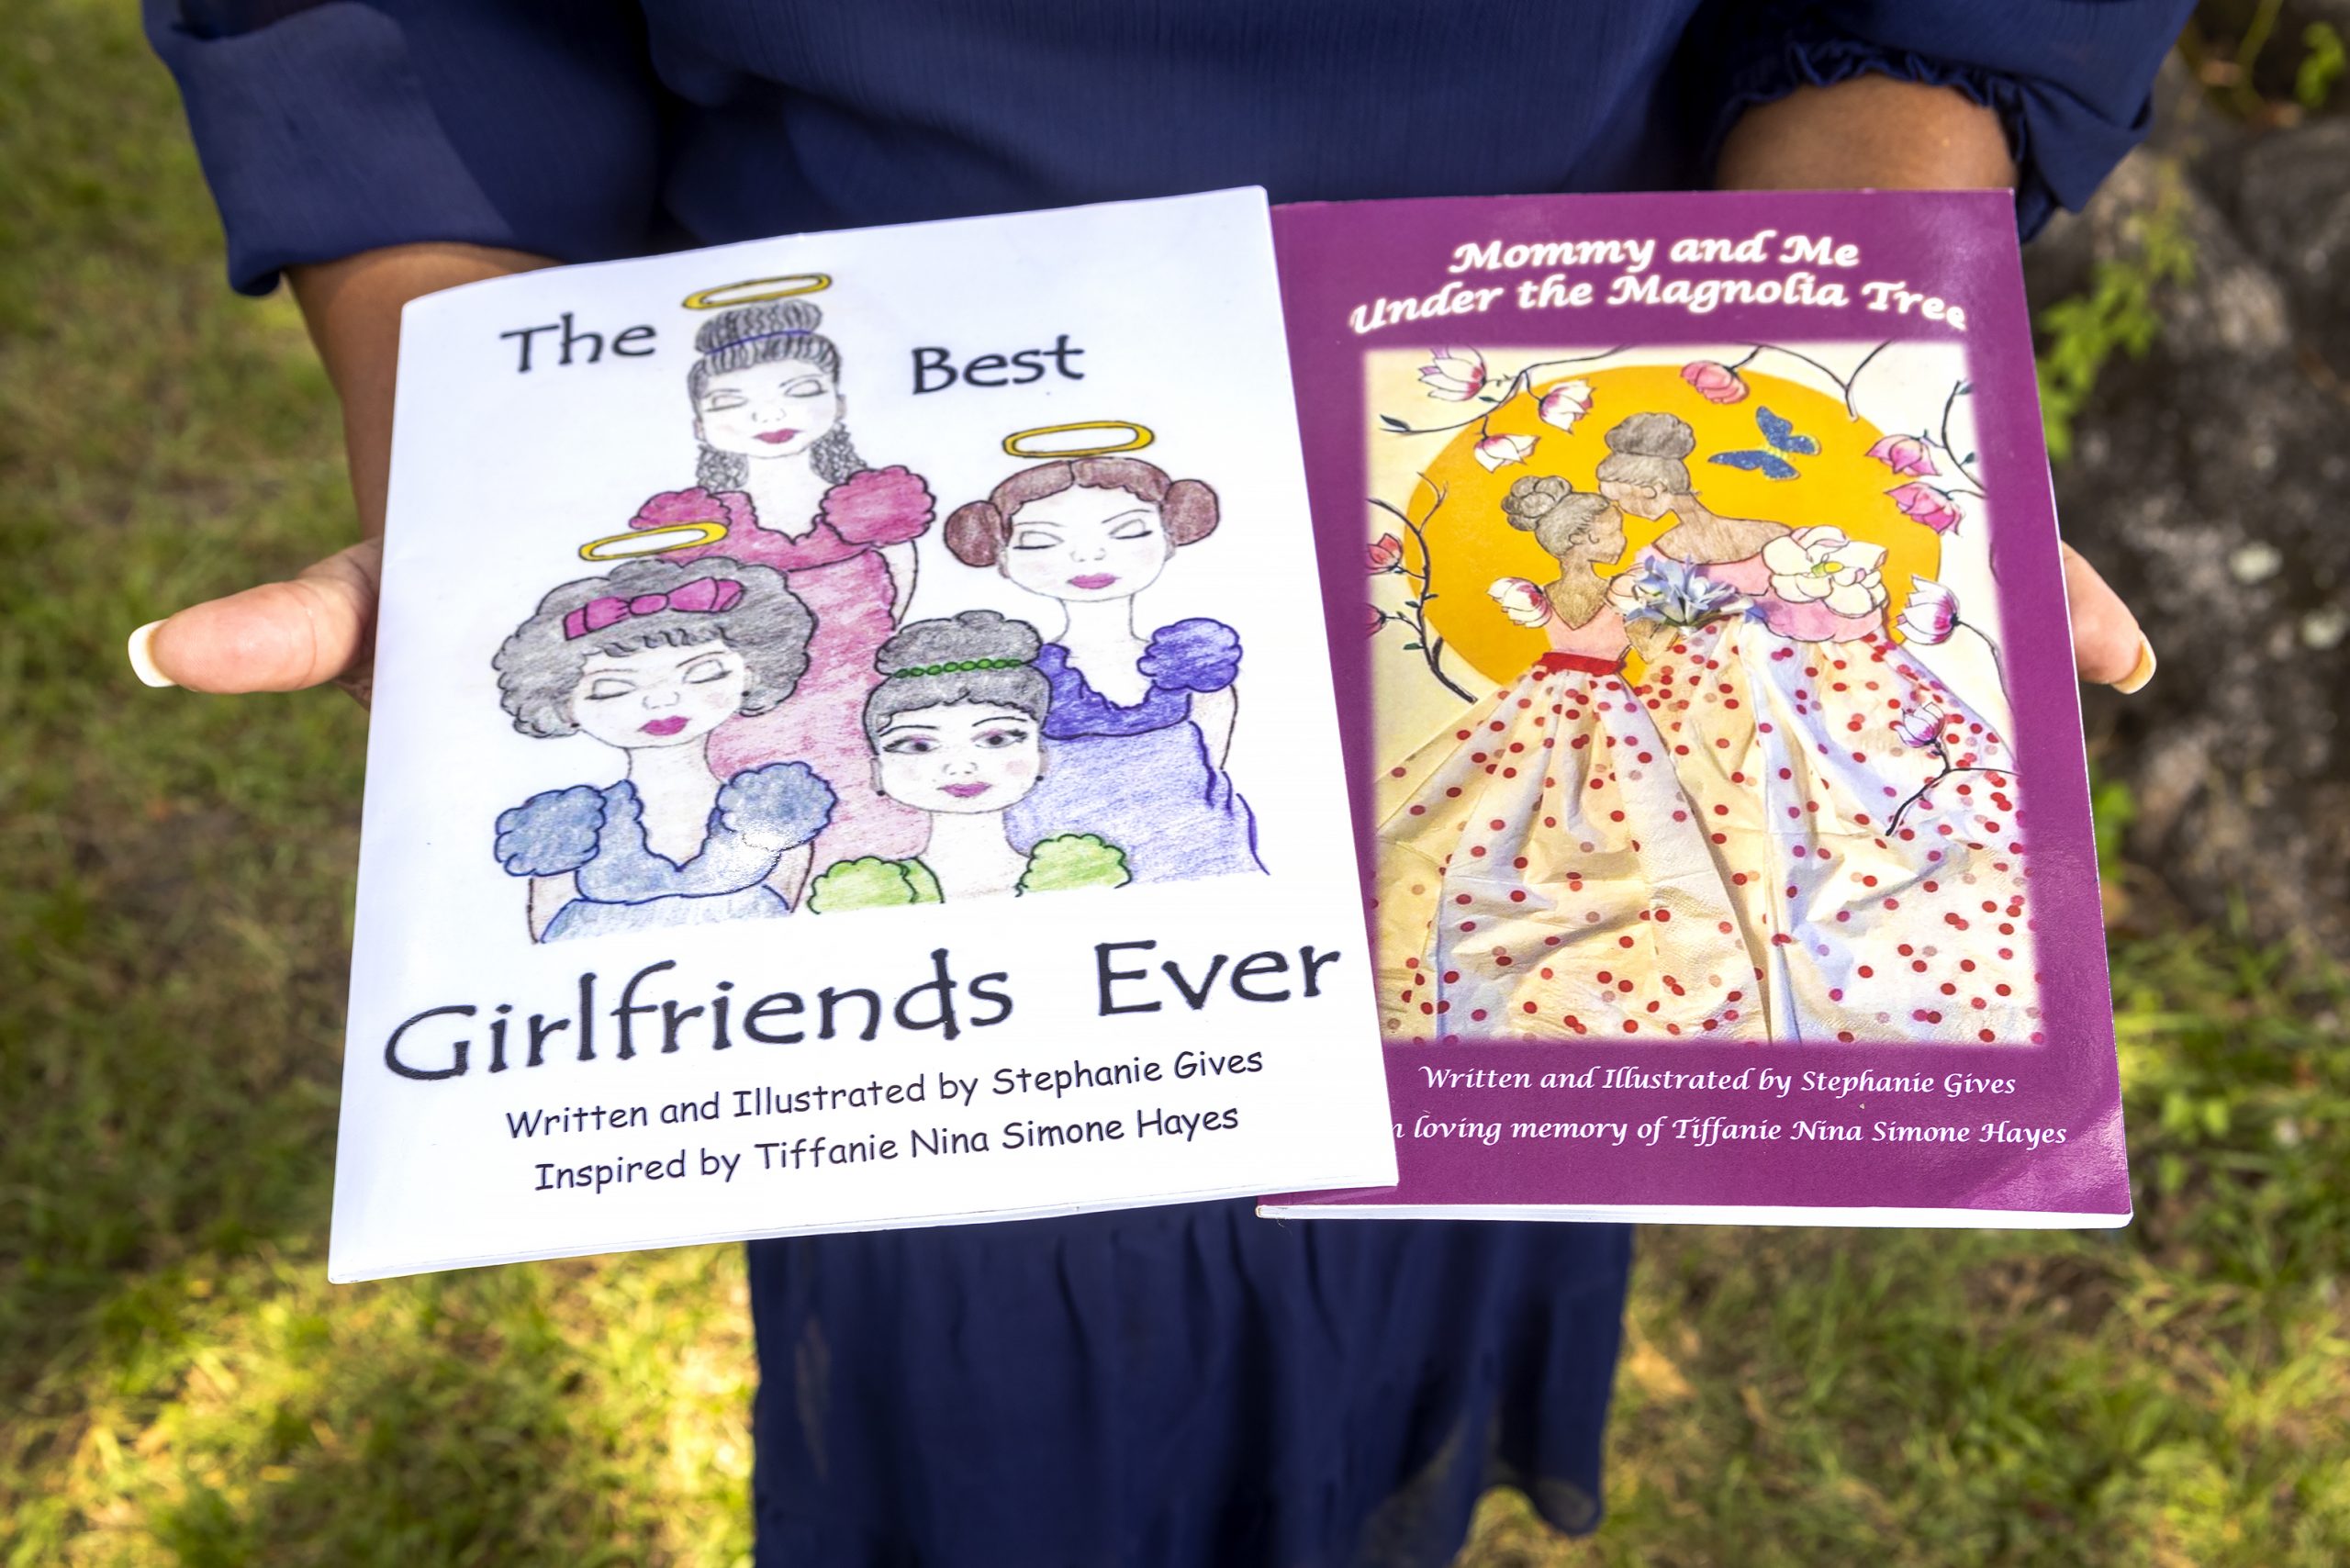 Stephanie Gives-Winckler cherishes memories of her daughter, Tiffanie, who died shortly before turning 14 due to complications of Rett Syndrome. Stephanie keeps Tiffanie’s memory alive through writing and illustrating children’s books. 